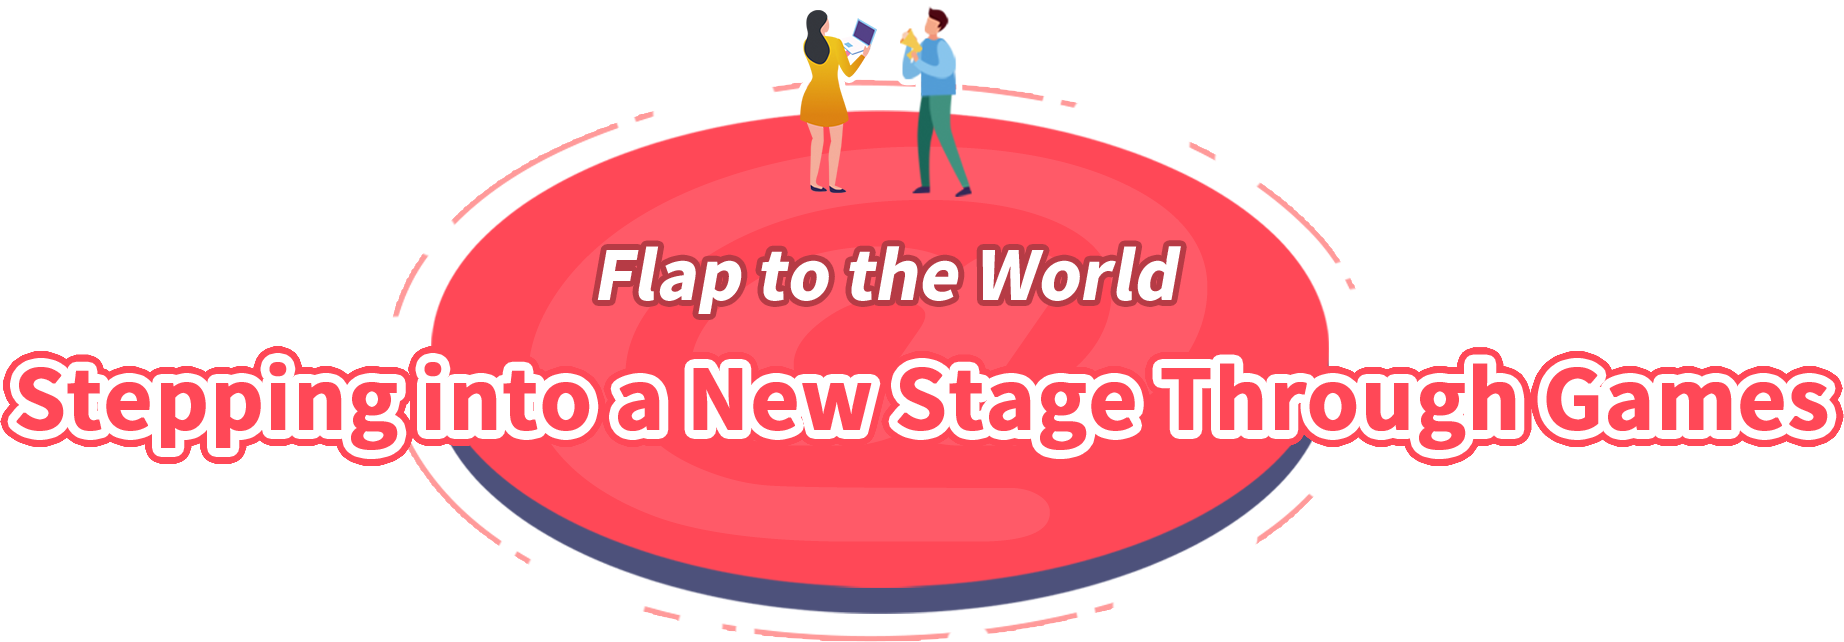 Flap to the World Stepping into a New Stage Through Games